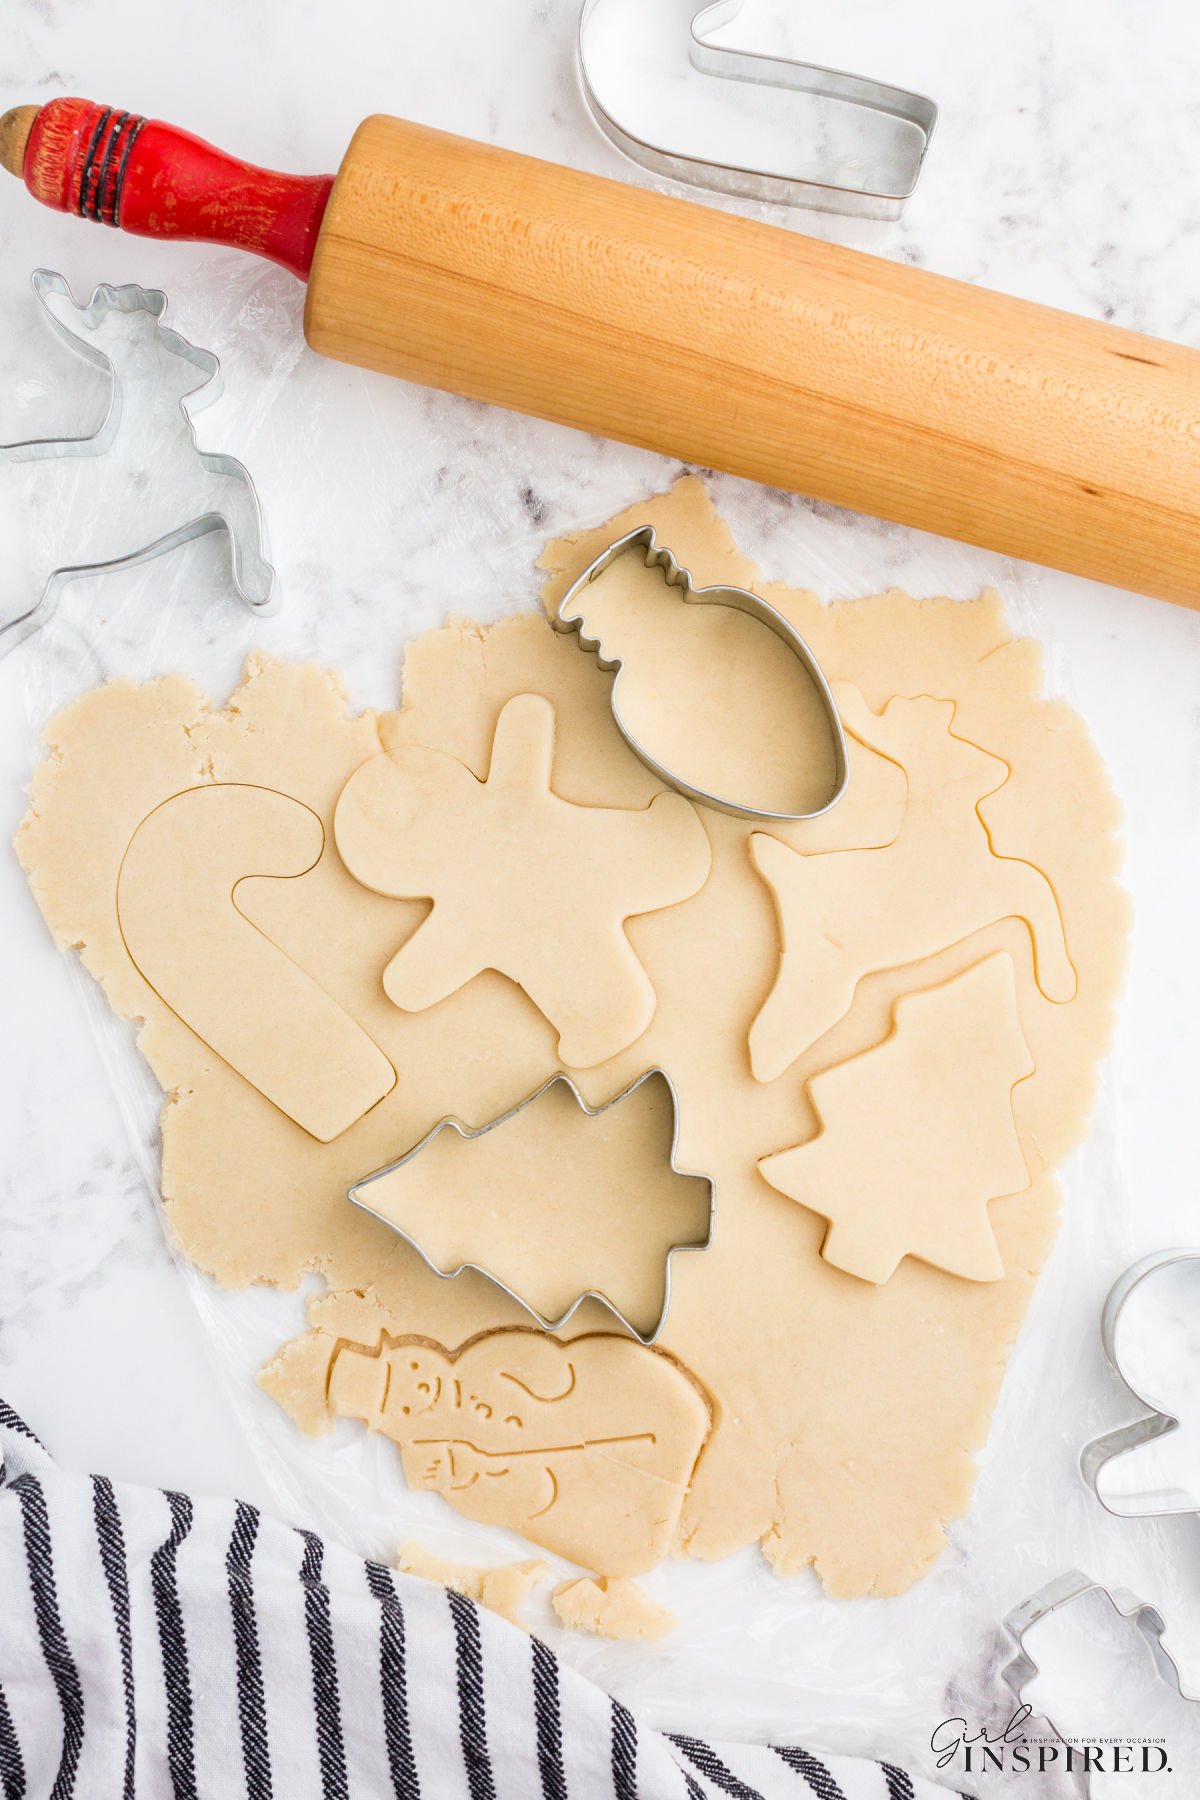 Cookie cutters on and around sheet of sugar cookie dough with various shapes cut into it.